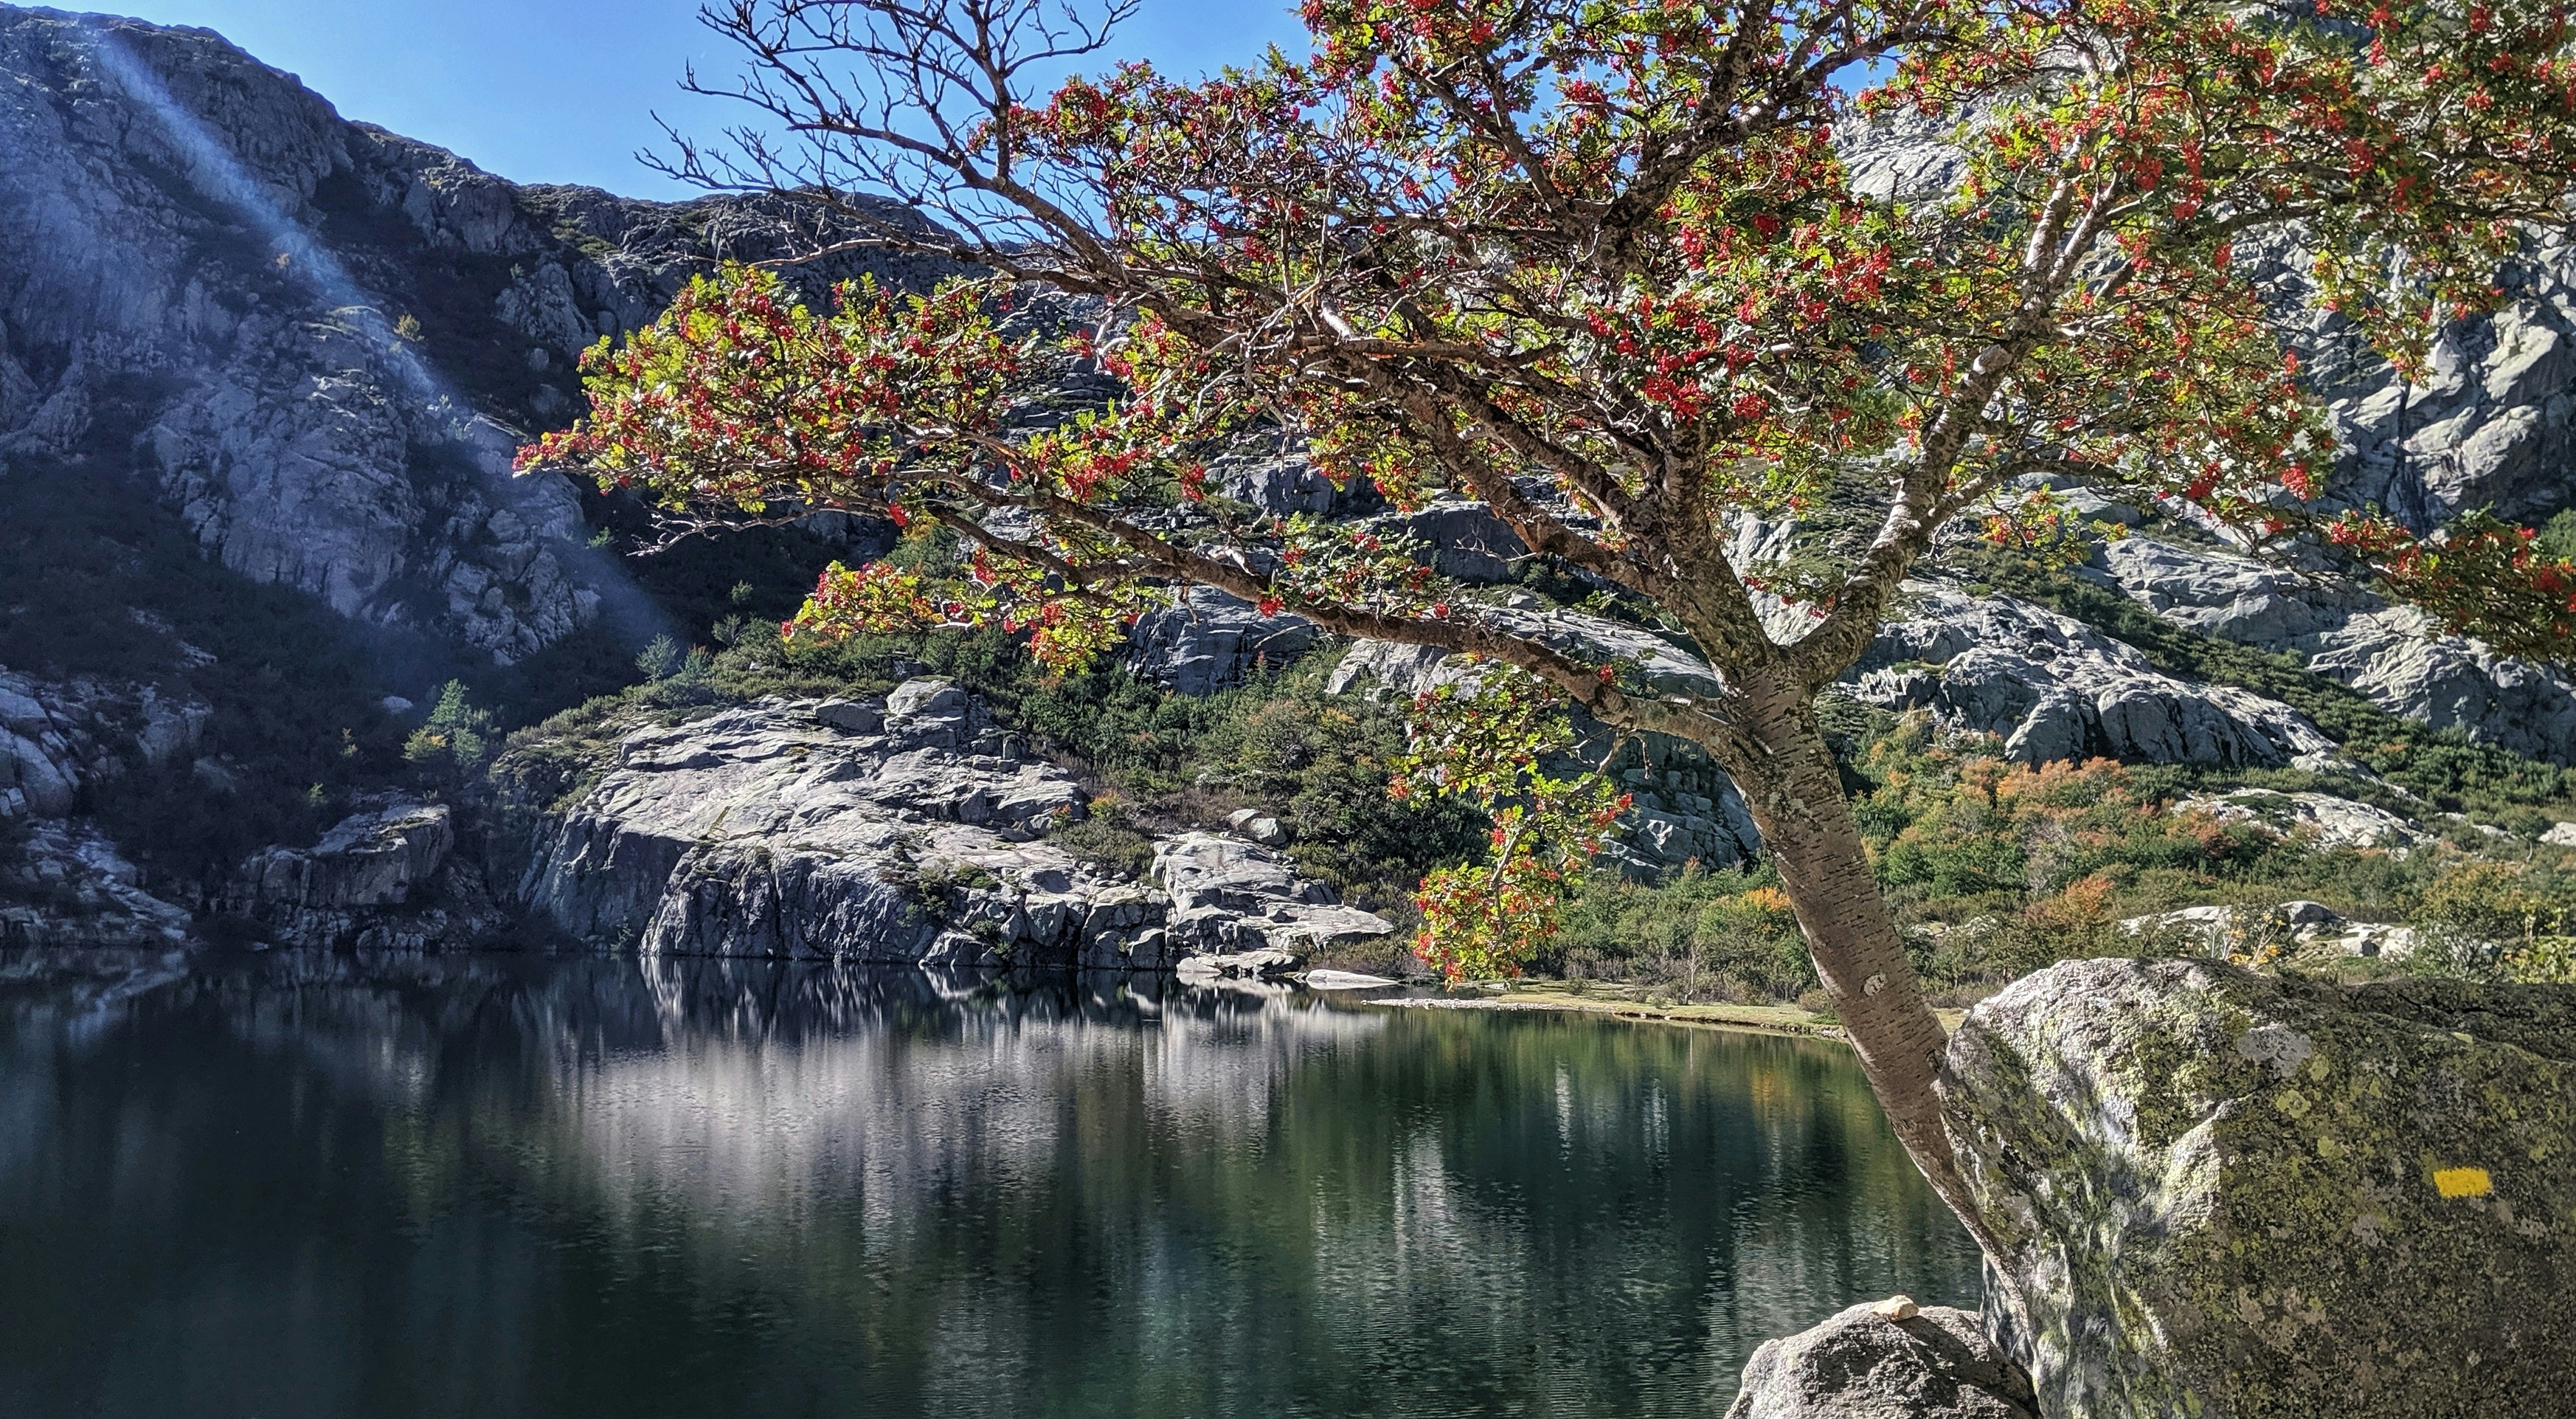 A splash of red across the serene and beautful Lac de Melu; the pay-off from a difficult climb